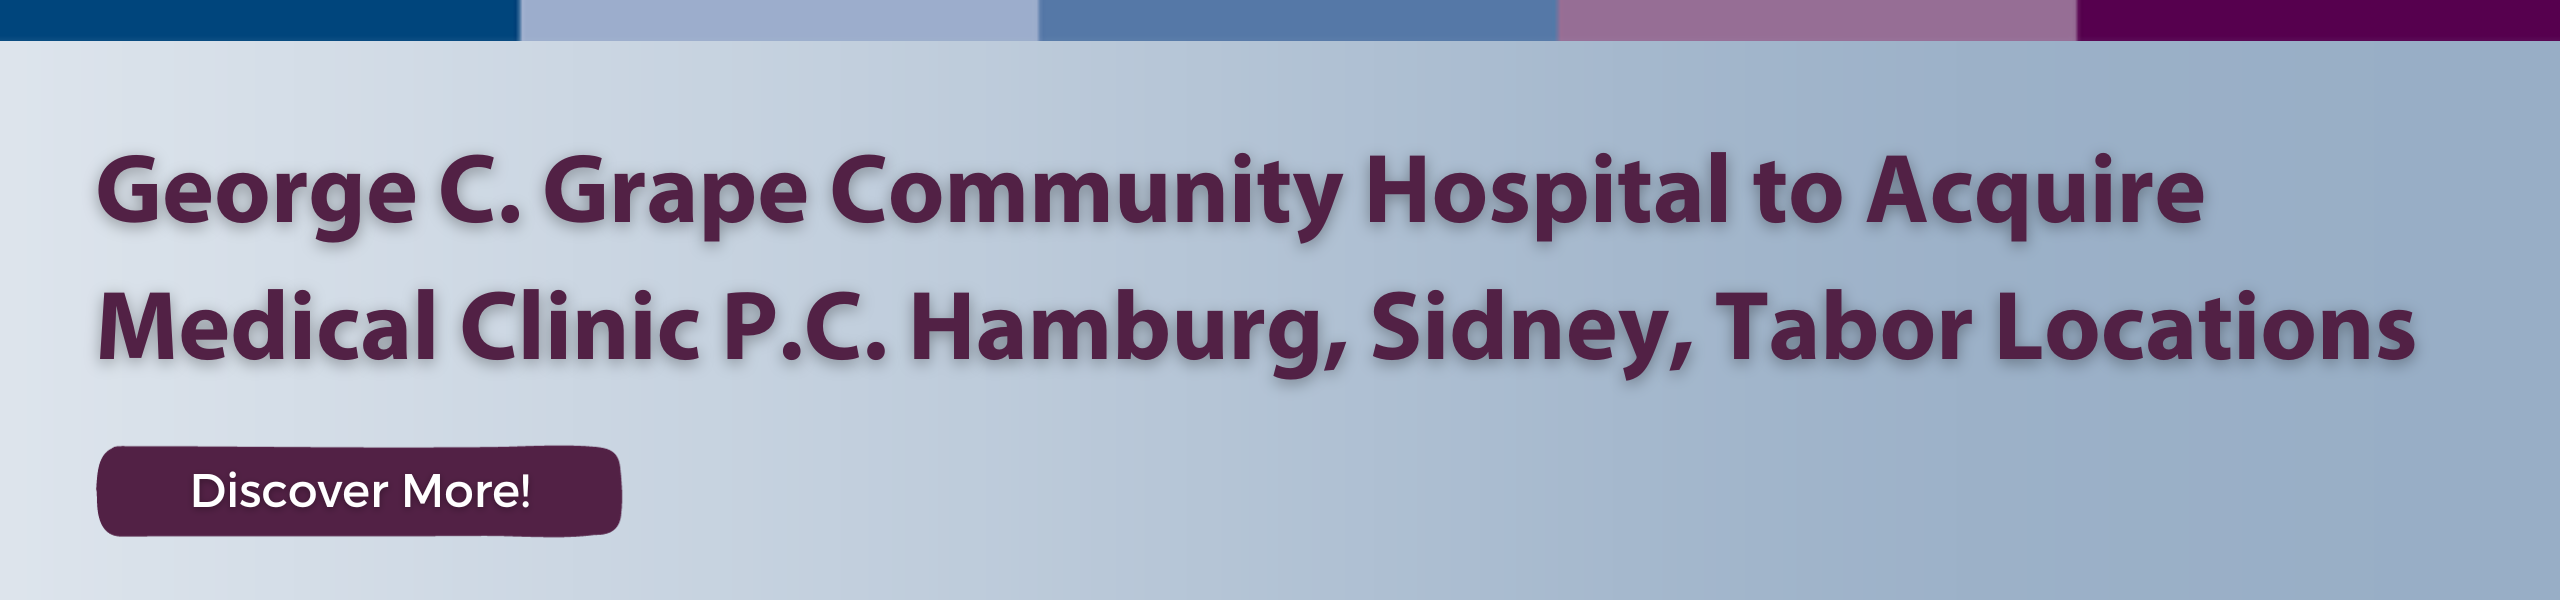 George C. Grape Community Hospital to Acquire
Medical Clinic P.C. Hamburg, Sidney, Tabor Locations
Discover More!